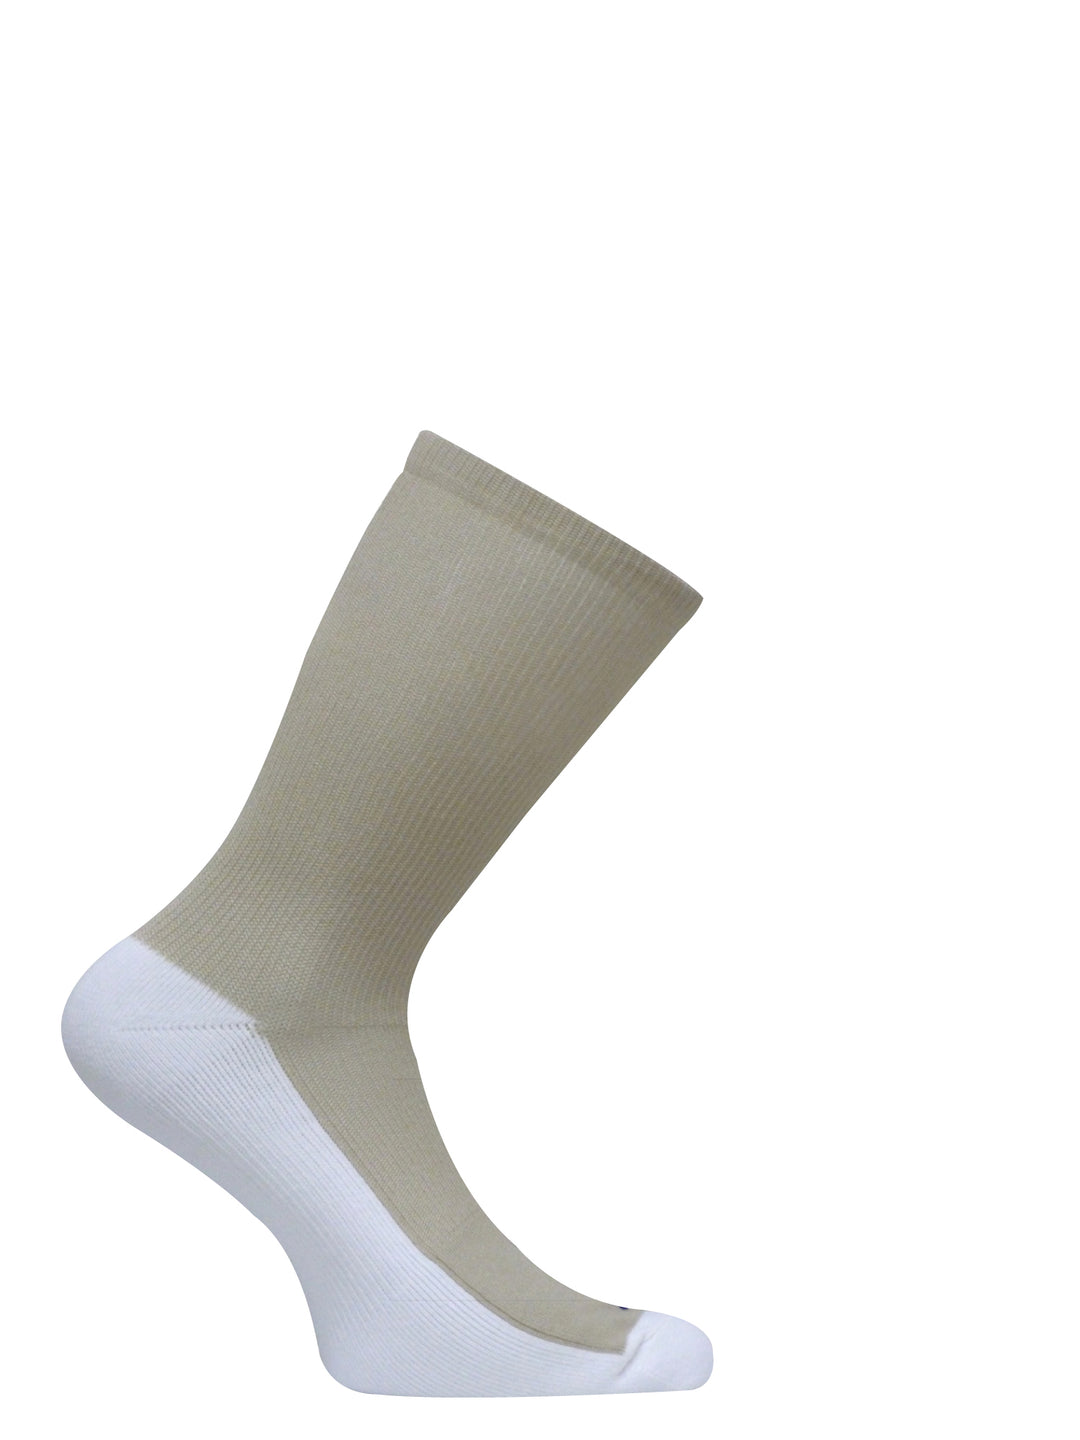 DIABETIC CREW FOOT AND ANKLE SUPPORT - SS5011 - Tan